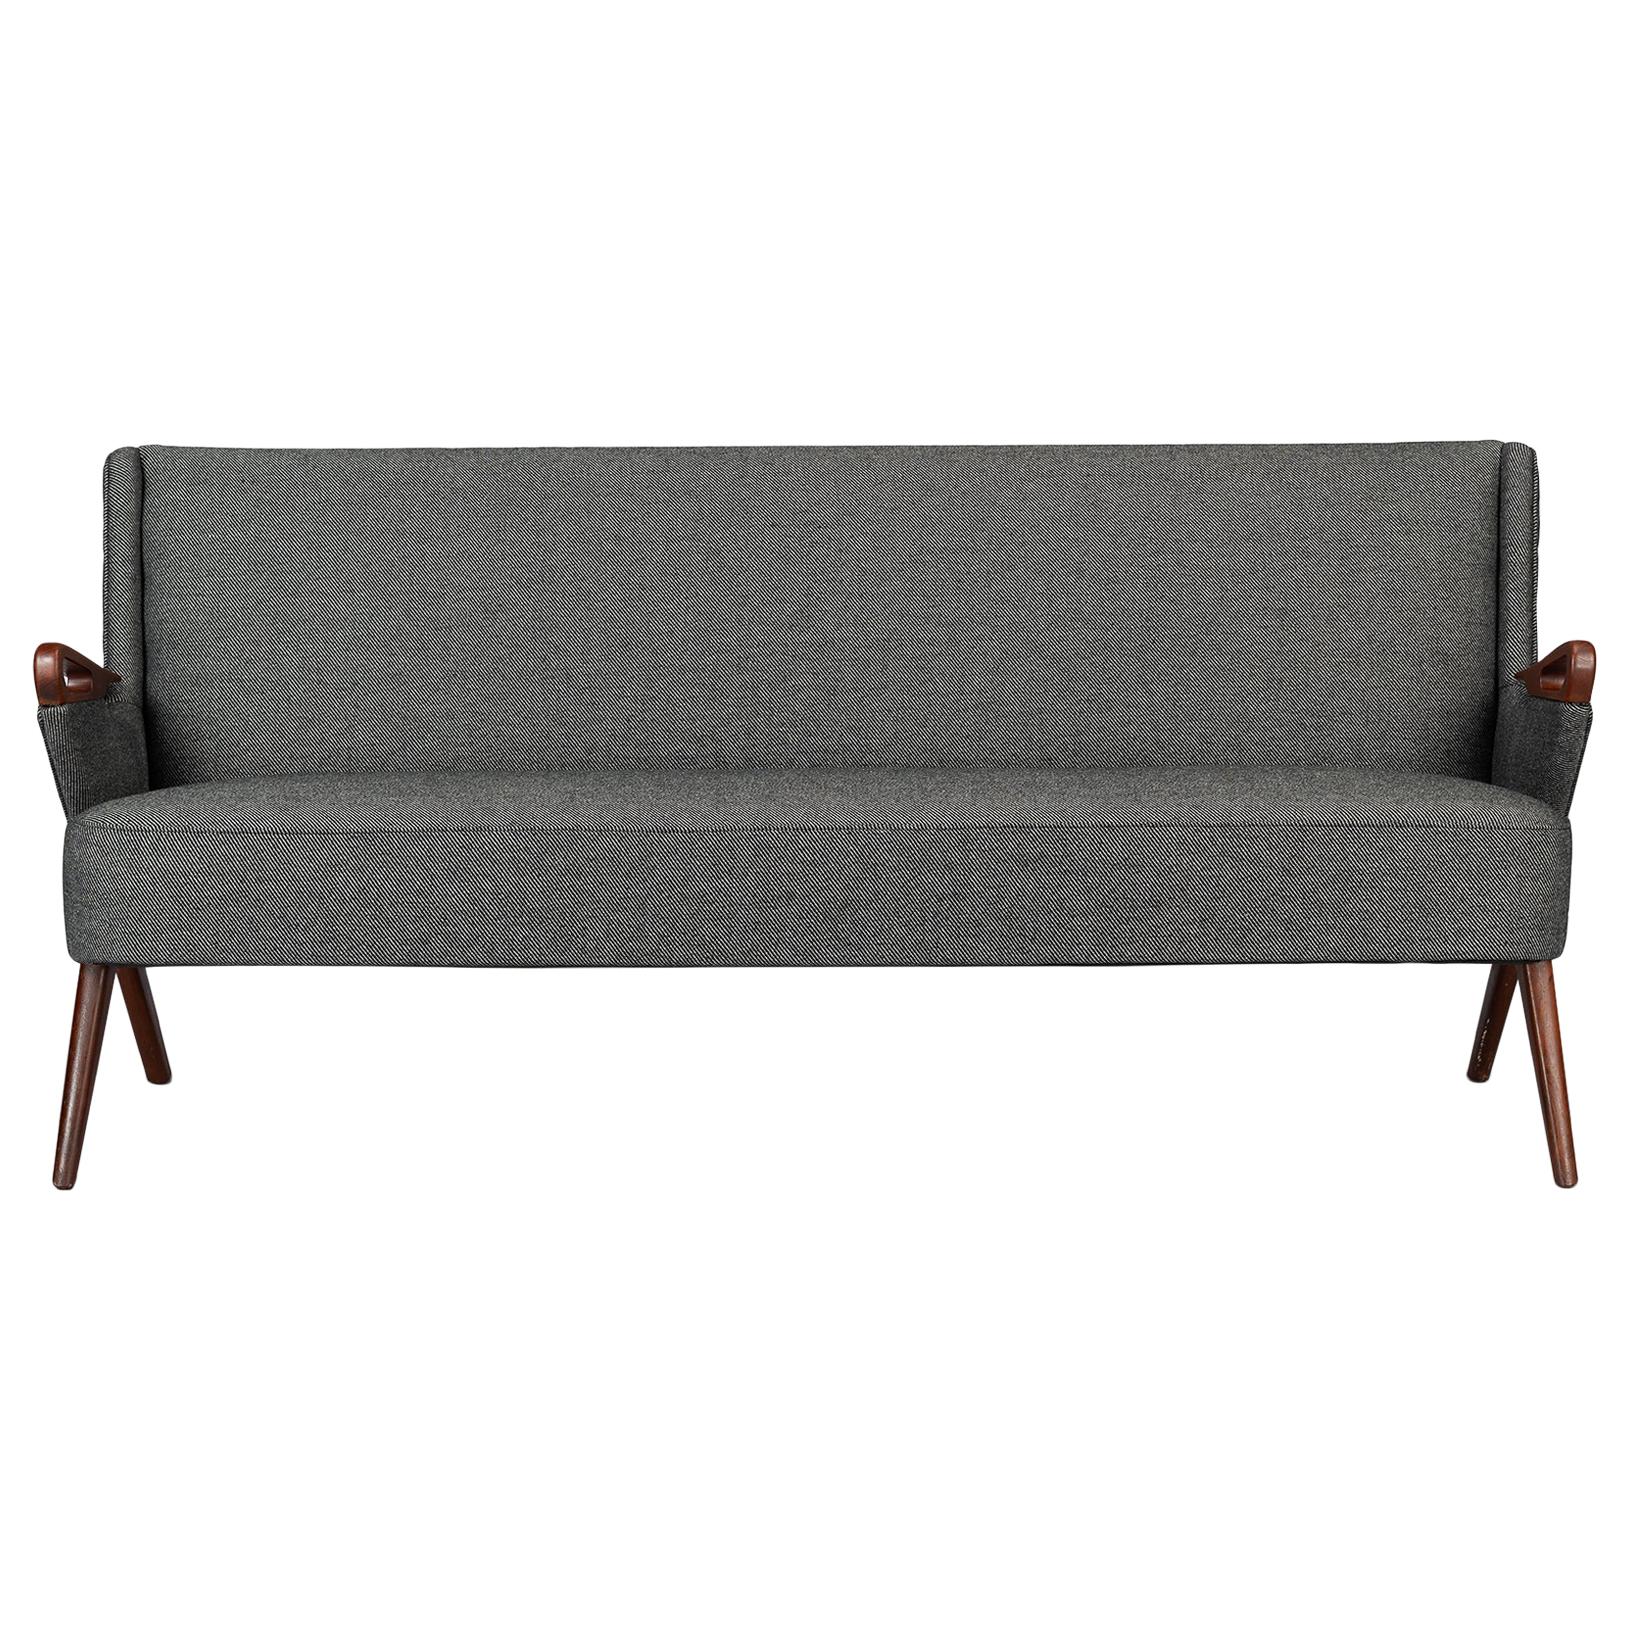 Reupholstered Dark Grey 2.5 Seat Sofa No. Cfb52 by C. Findahl Brodersen, 1950s For Sale